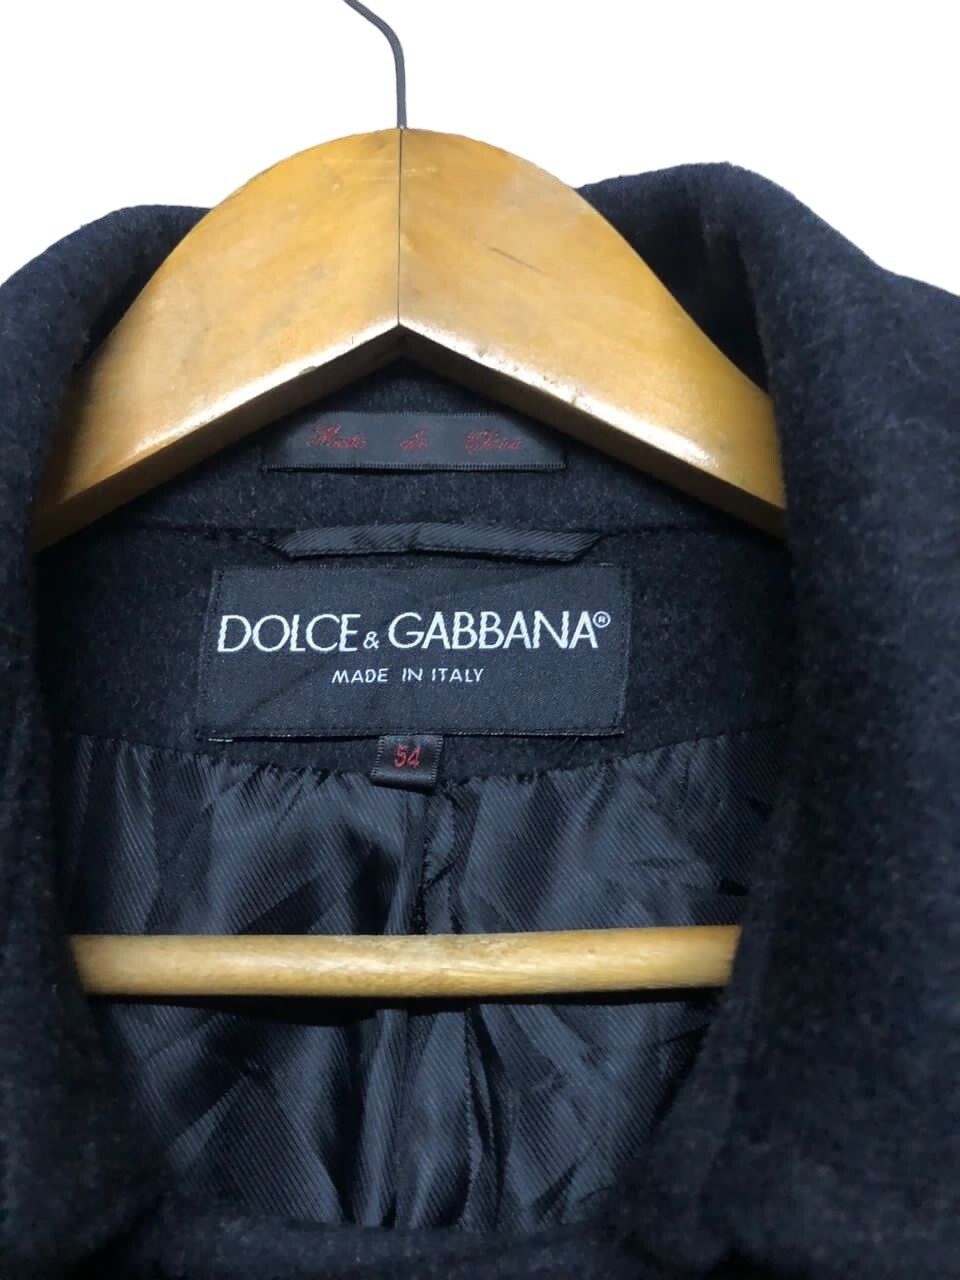 Dolce & Gabbana Wool Blend Double Breasted Overcoat - 6